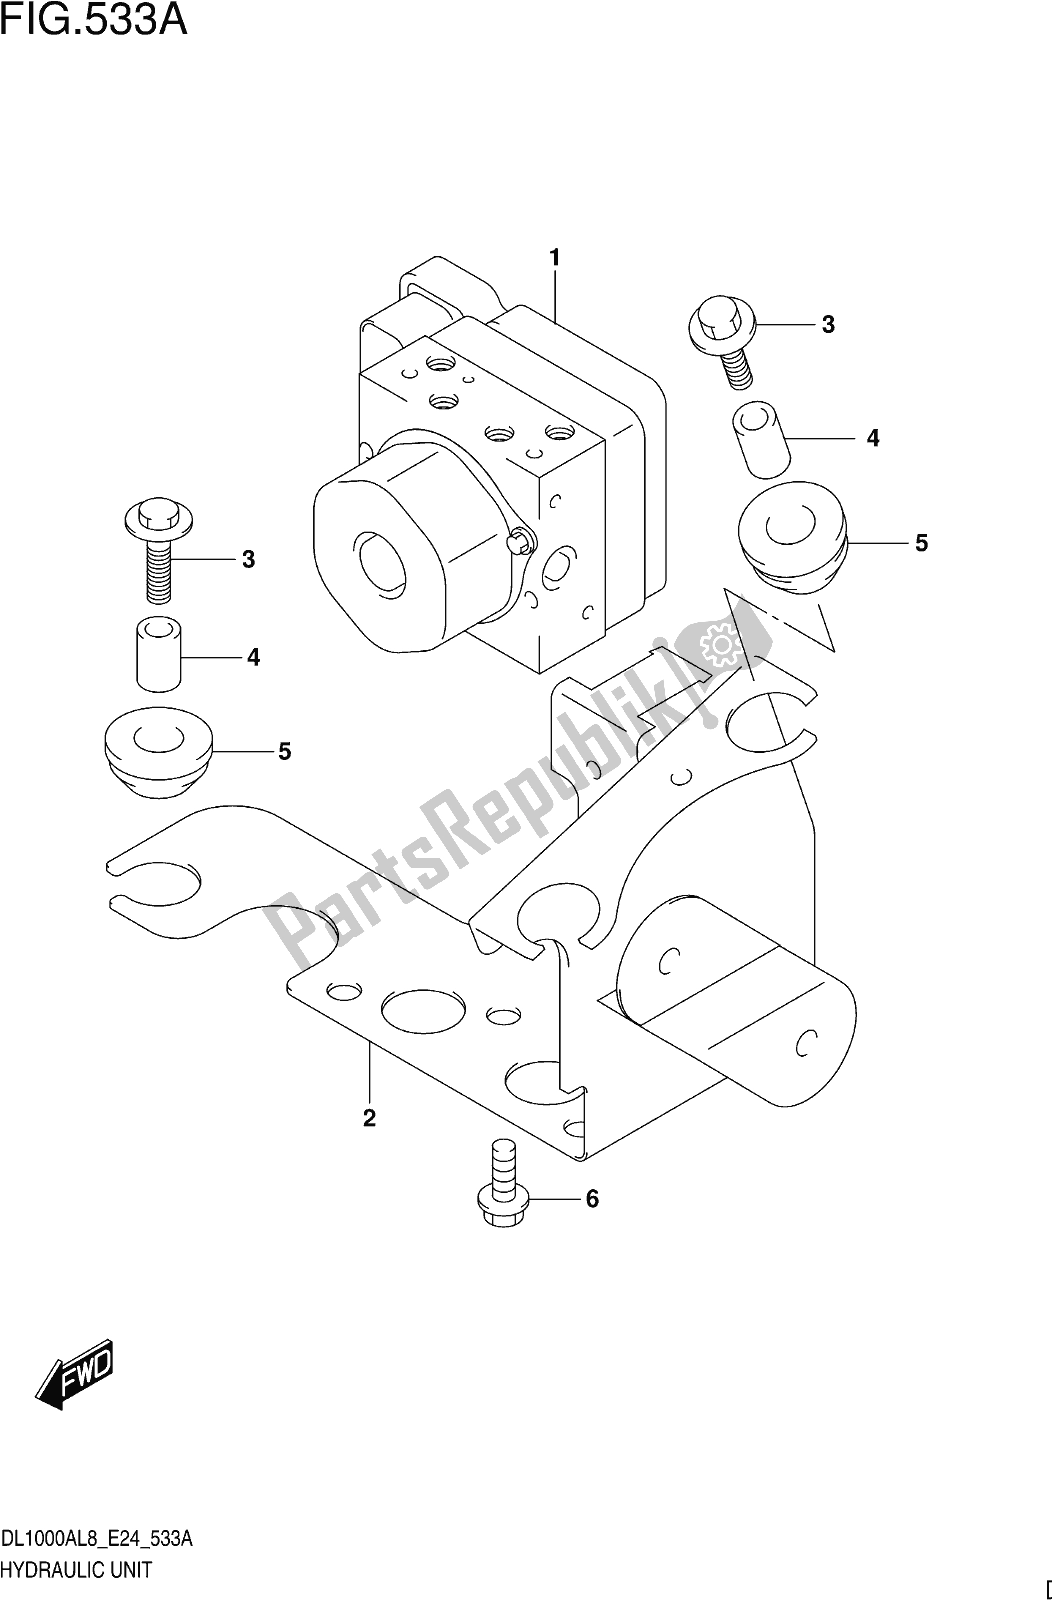 All parts for the Fig. 533a Hydraulic Unit of the Suzuki DL 1000 XA 2018